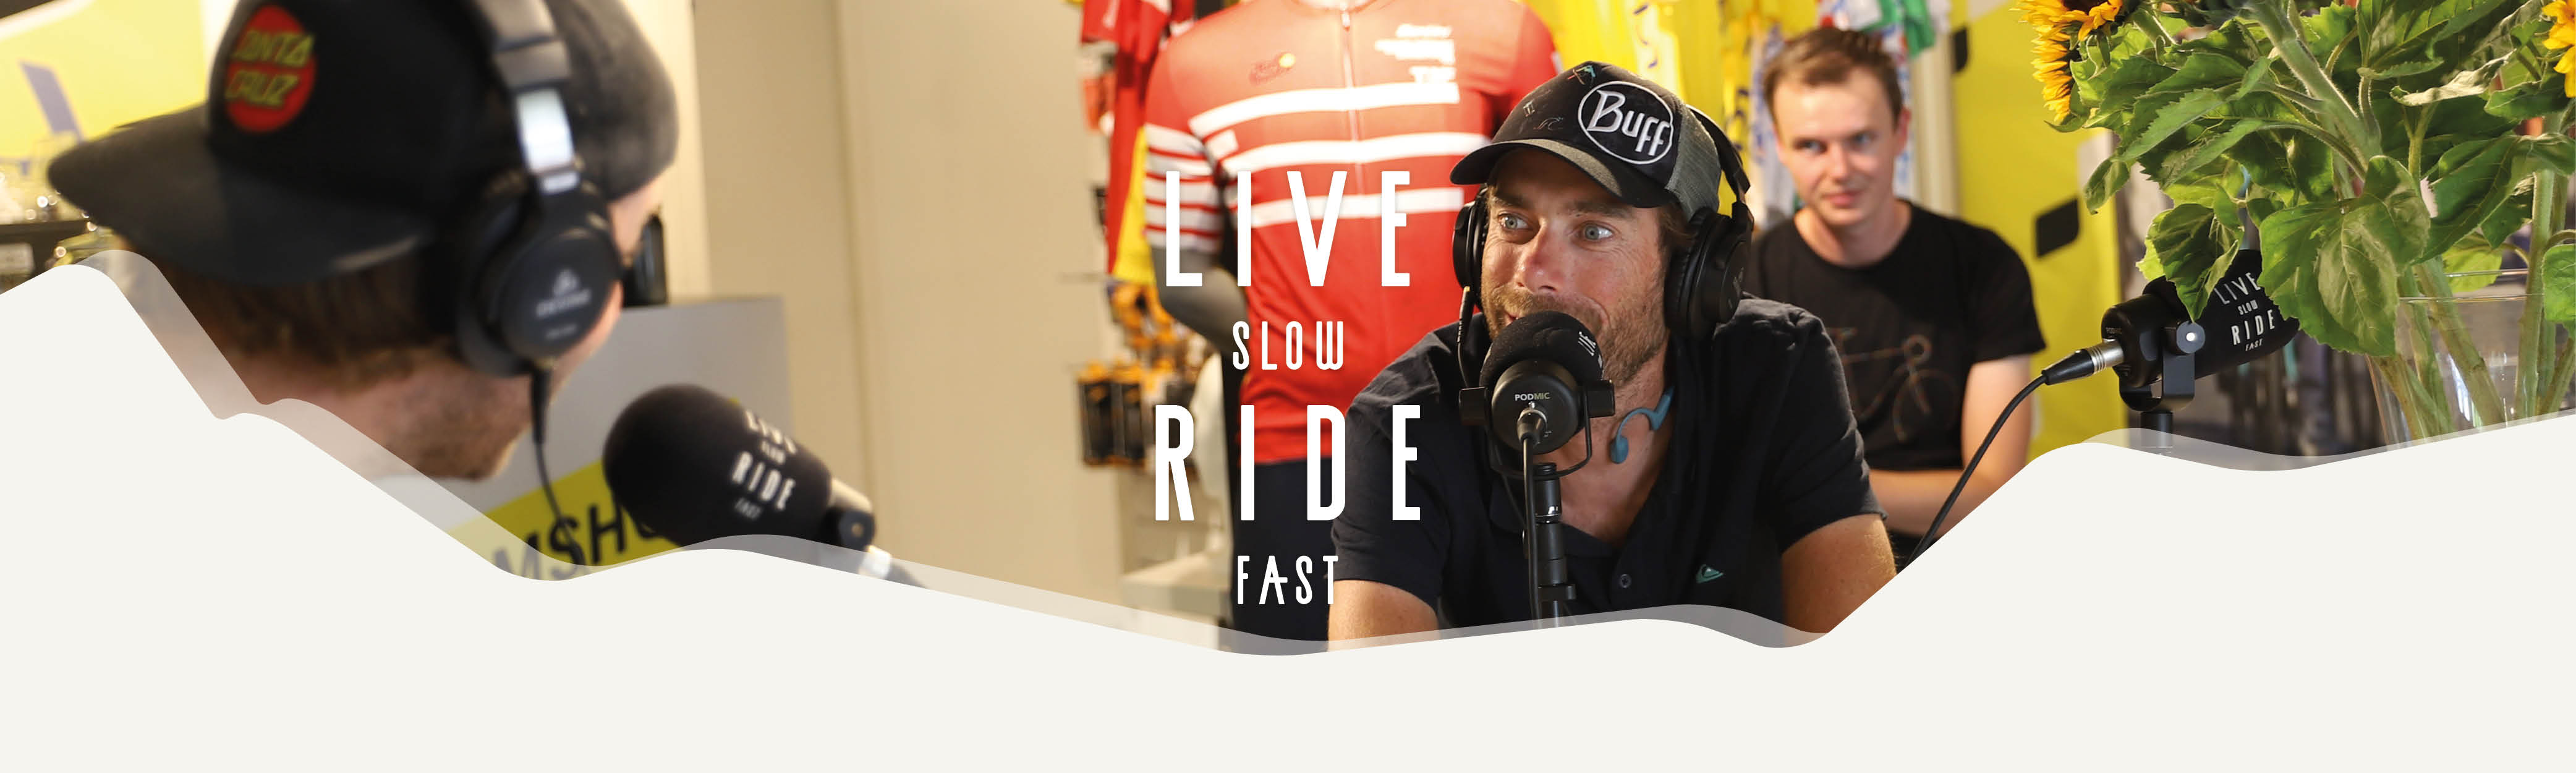 live slow ride fast